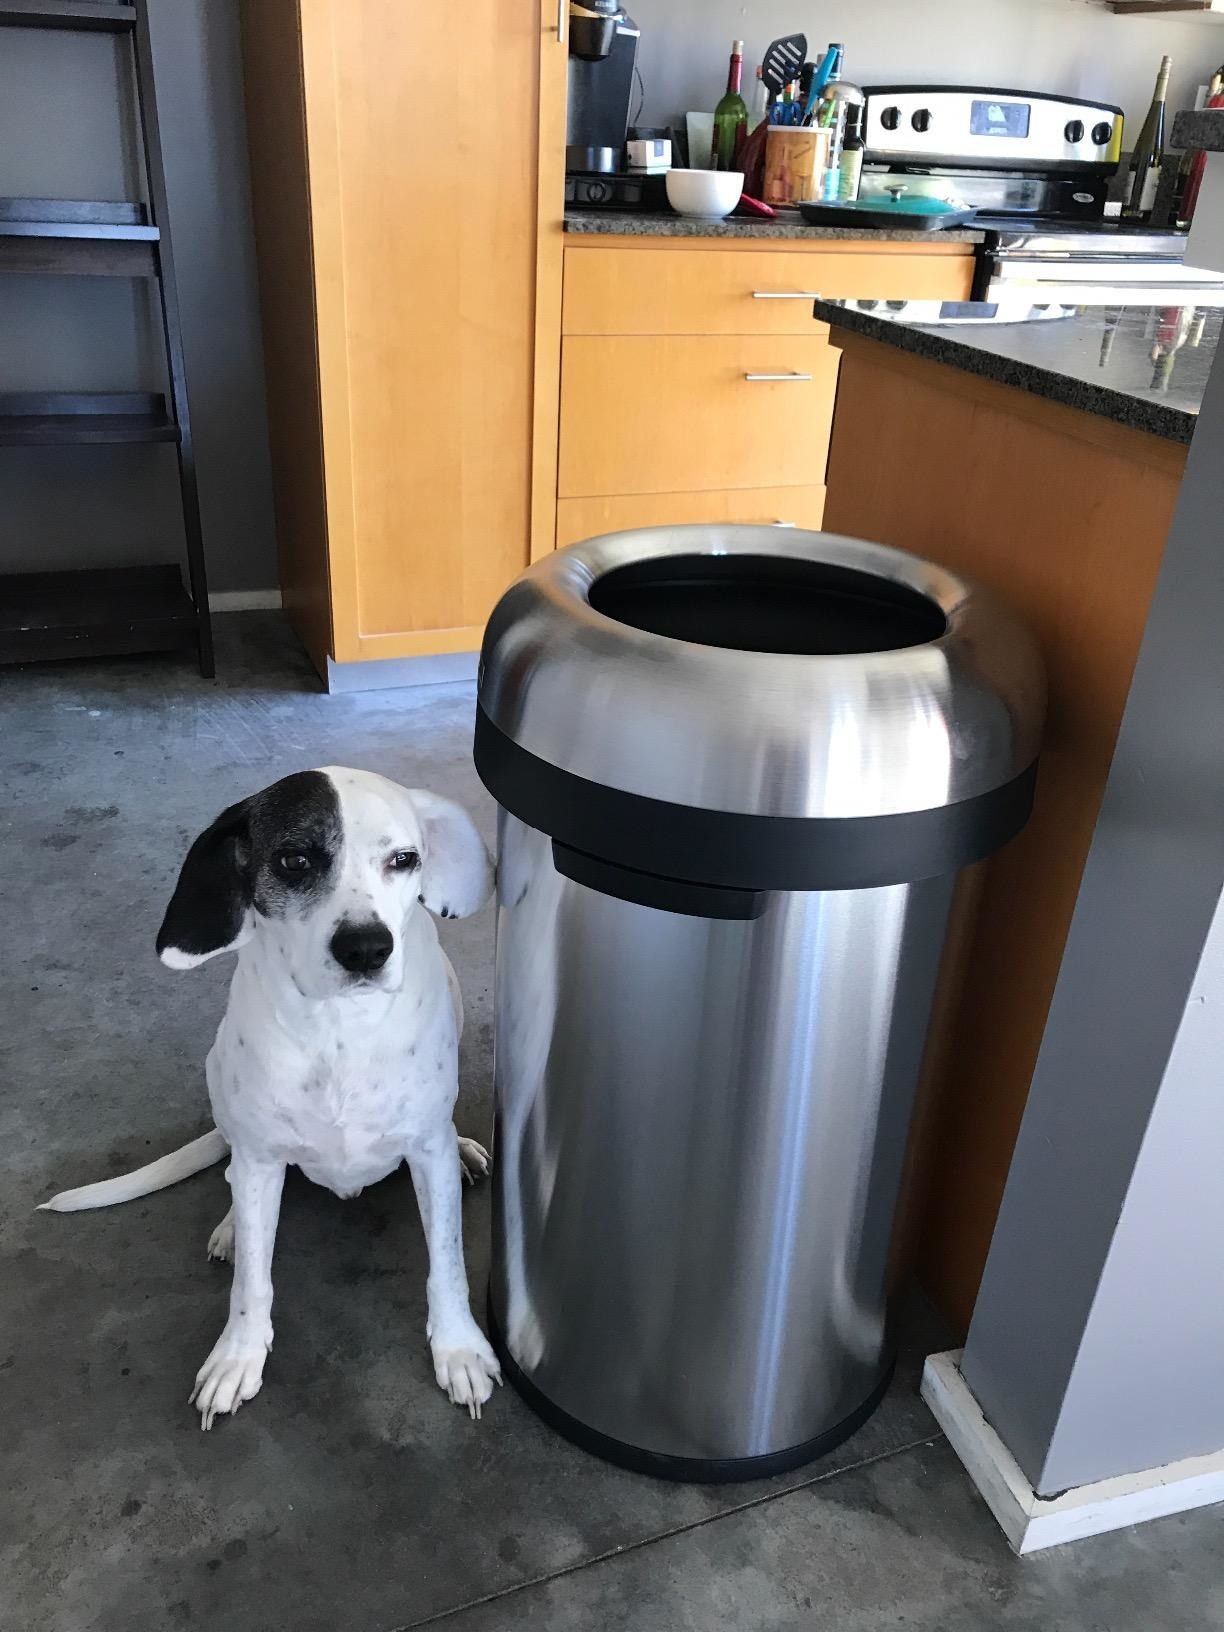 reviewer image of a dog sitting next to a simplehuman open top trash can in a kitchen